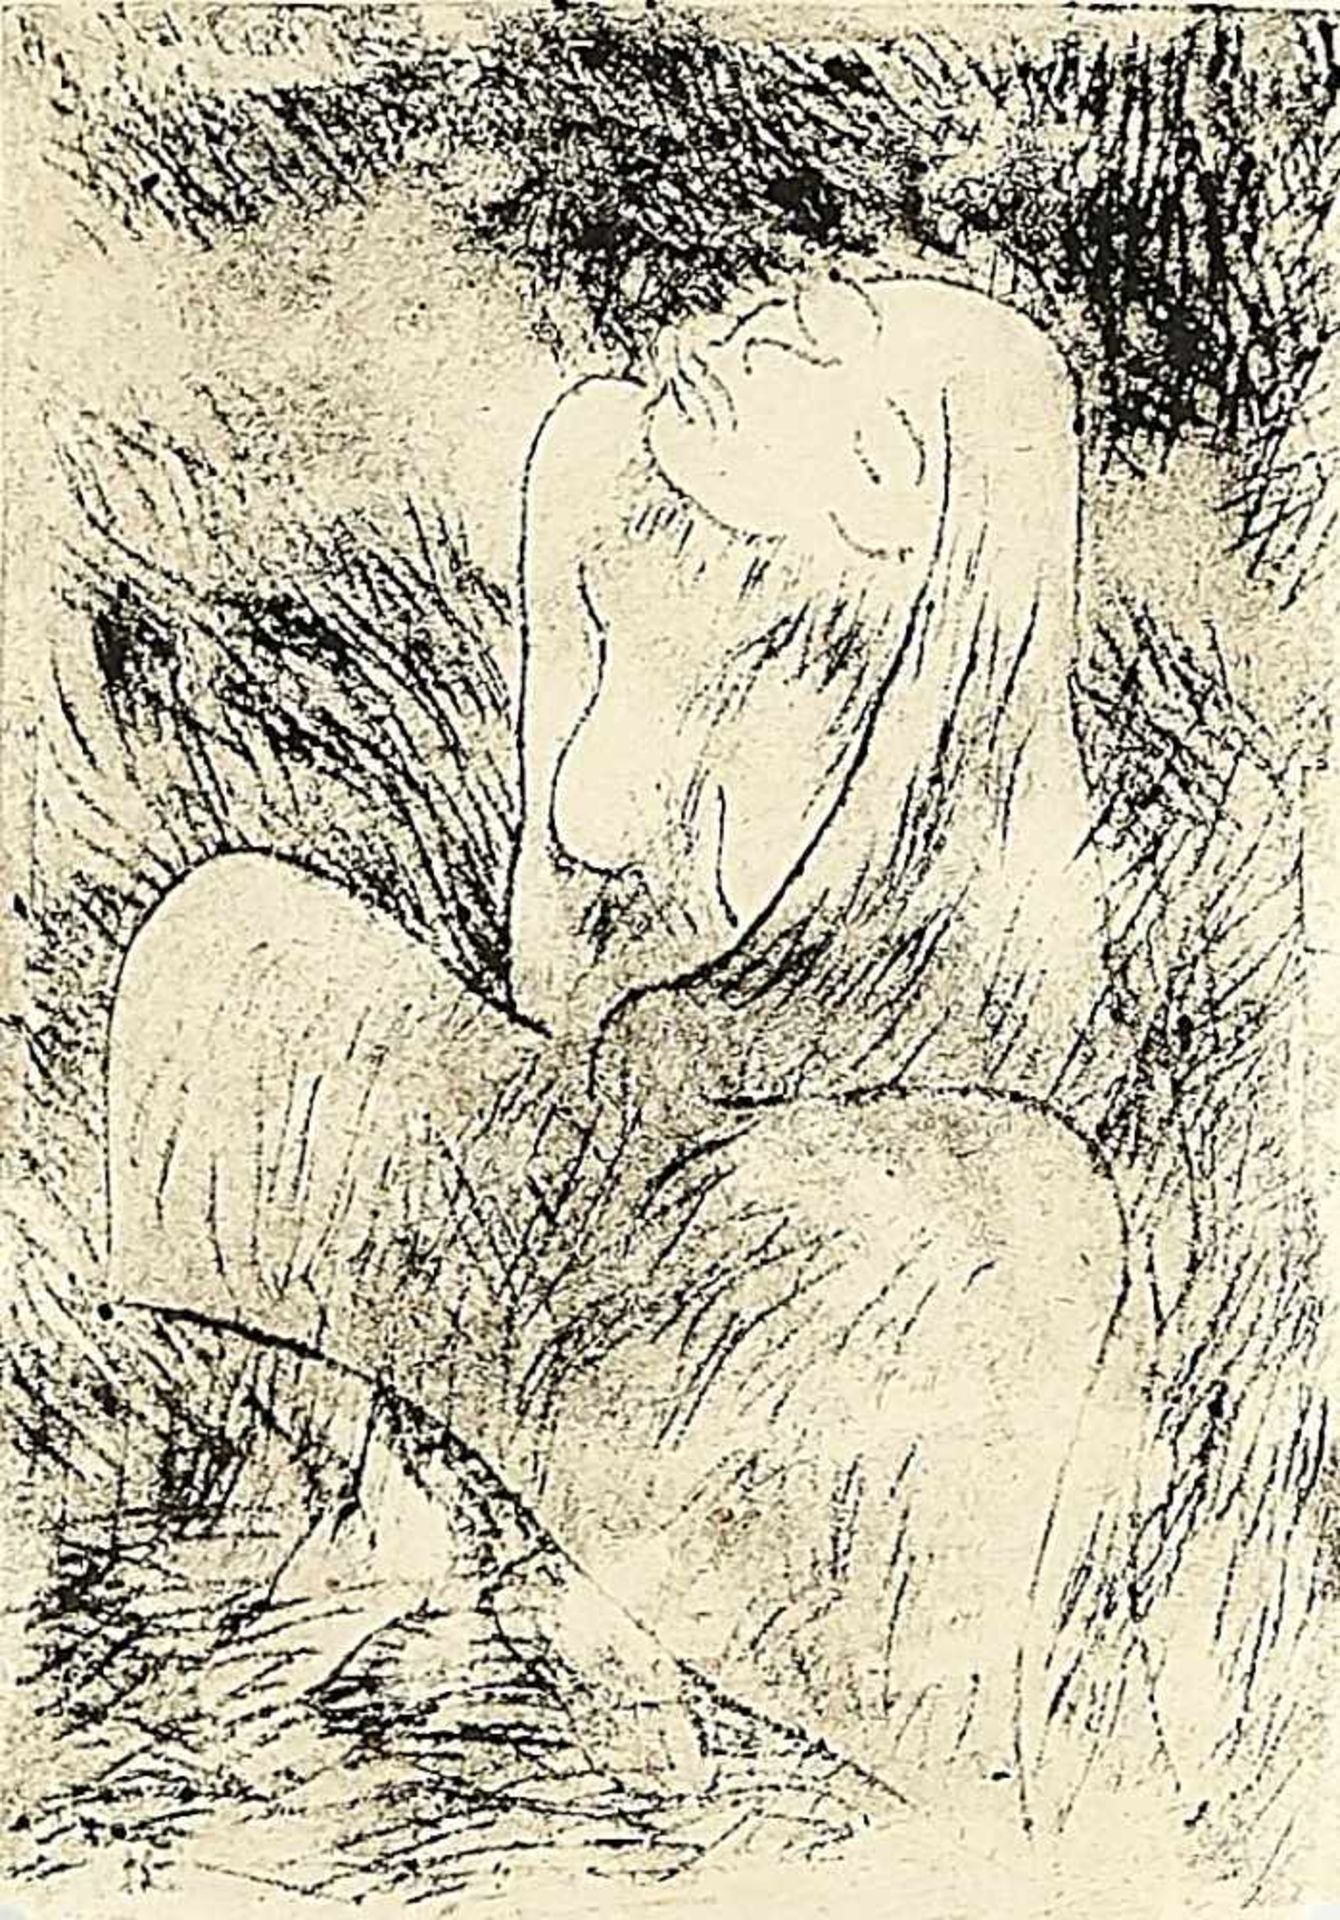 Dt. Expressionist in the 1920s, a disagreeable semi-nude with closed eyes and feet in the